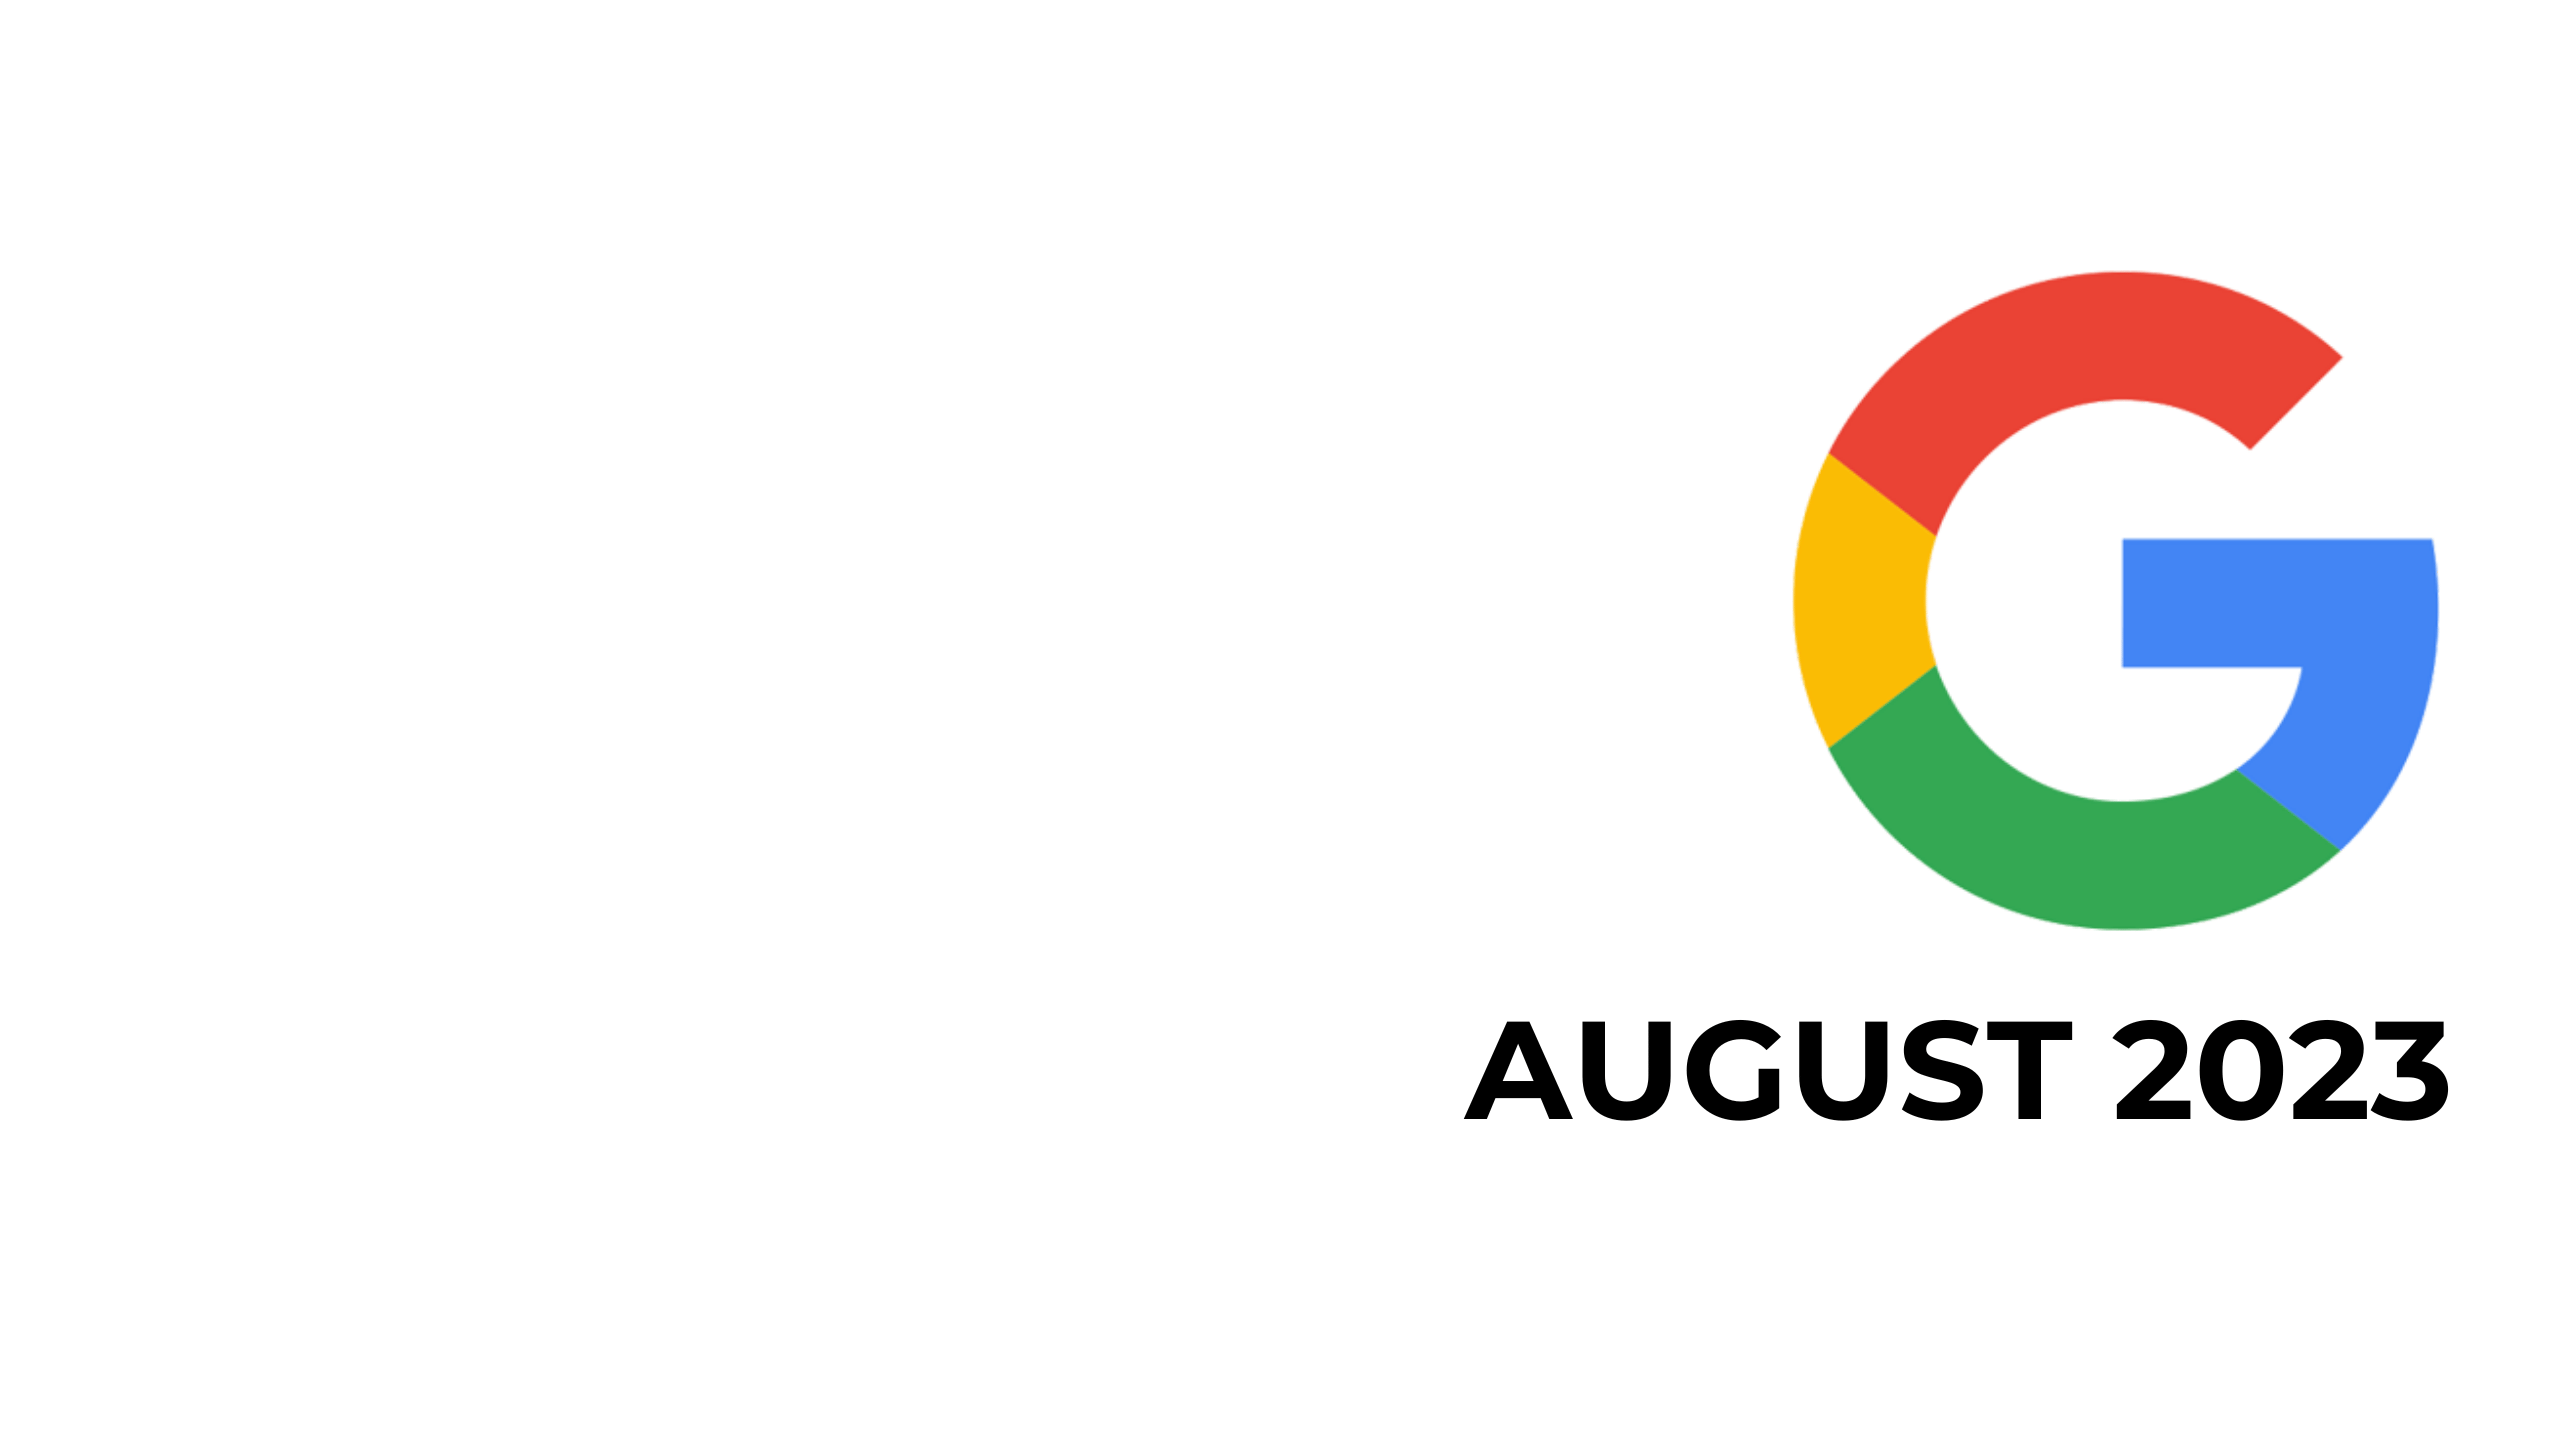 AUGUST 23